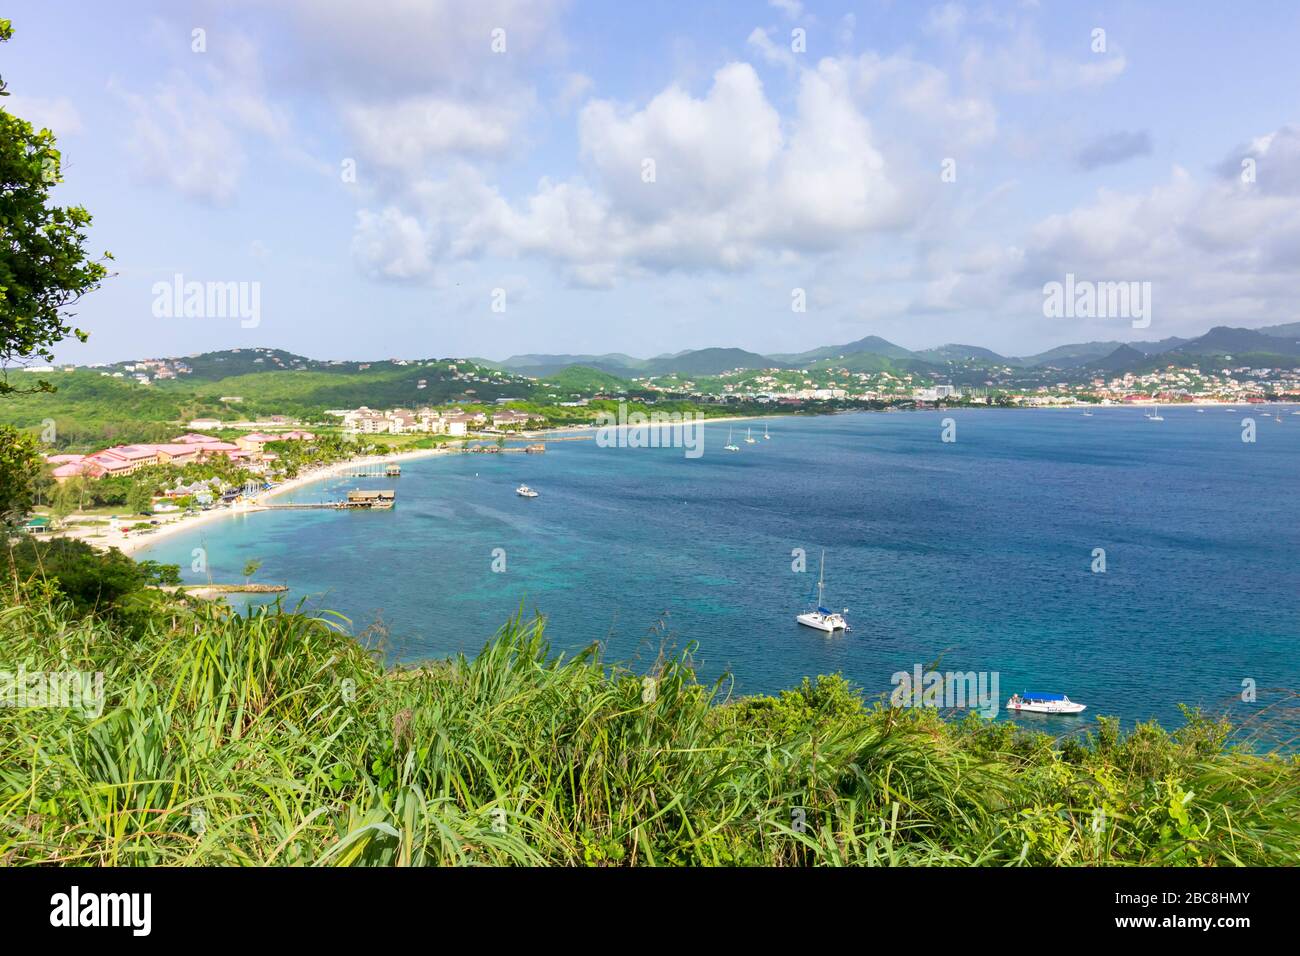 A breathtaking view of the bay the beach, boats and causeway at Gros-Islet from the top of Fort Rodney at Pigeon Island National Landmark, Saint Lucia Stock Photo